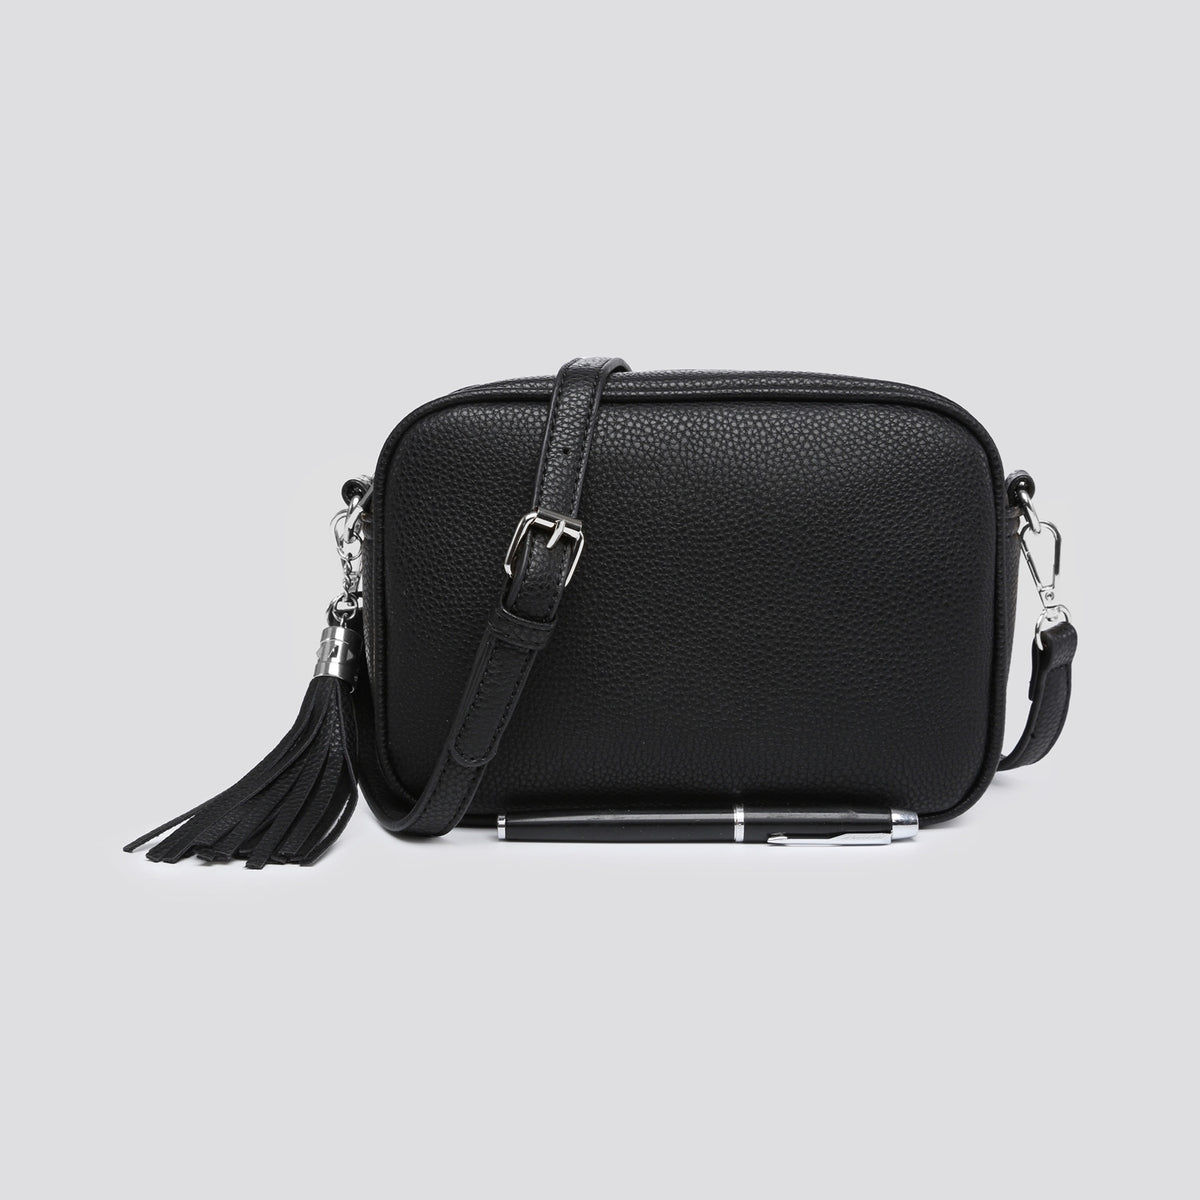 Camera bag with silver hardware